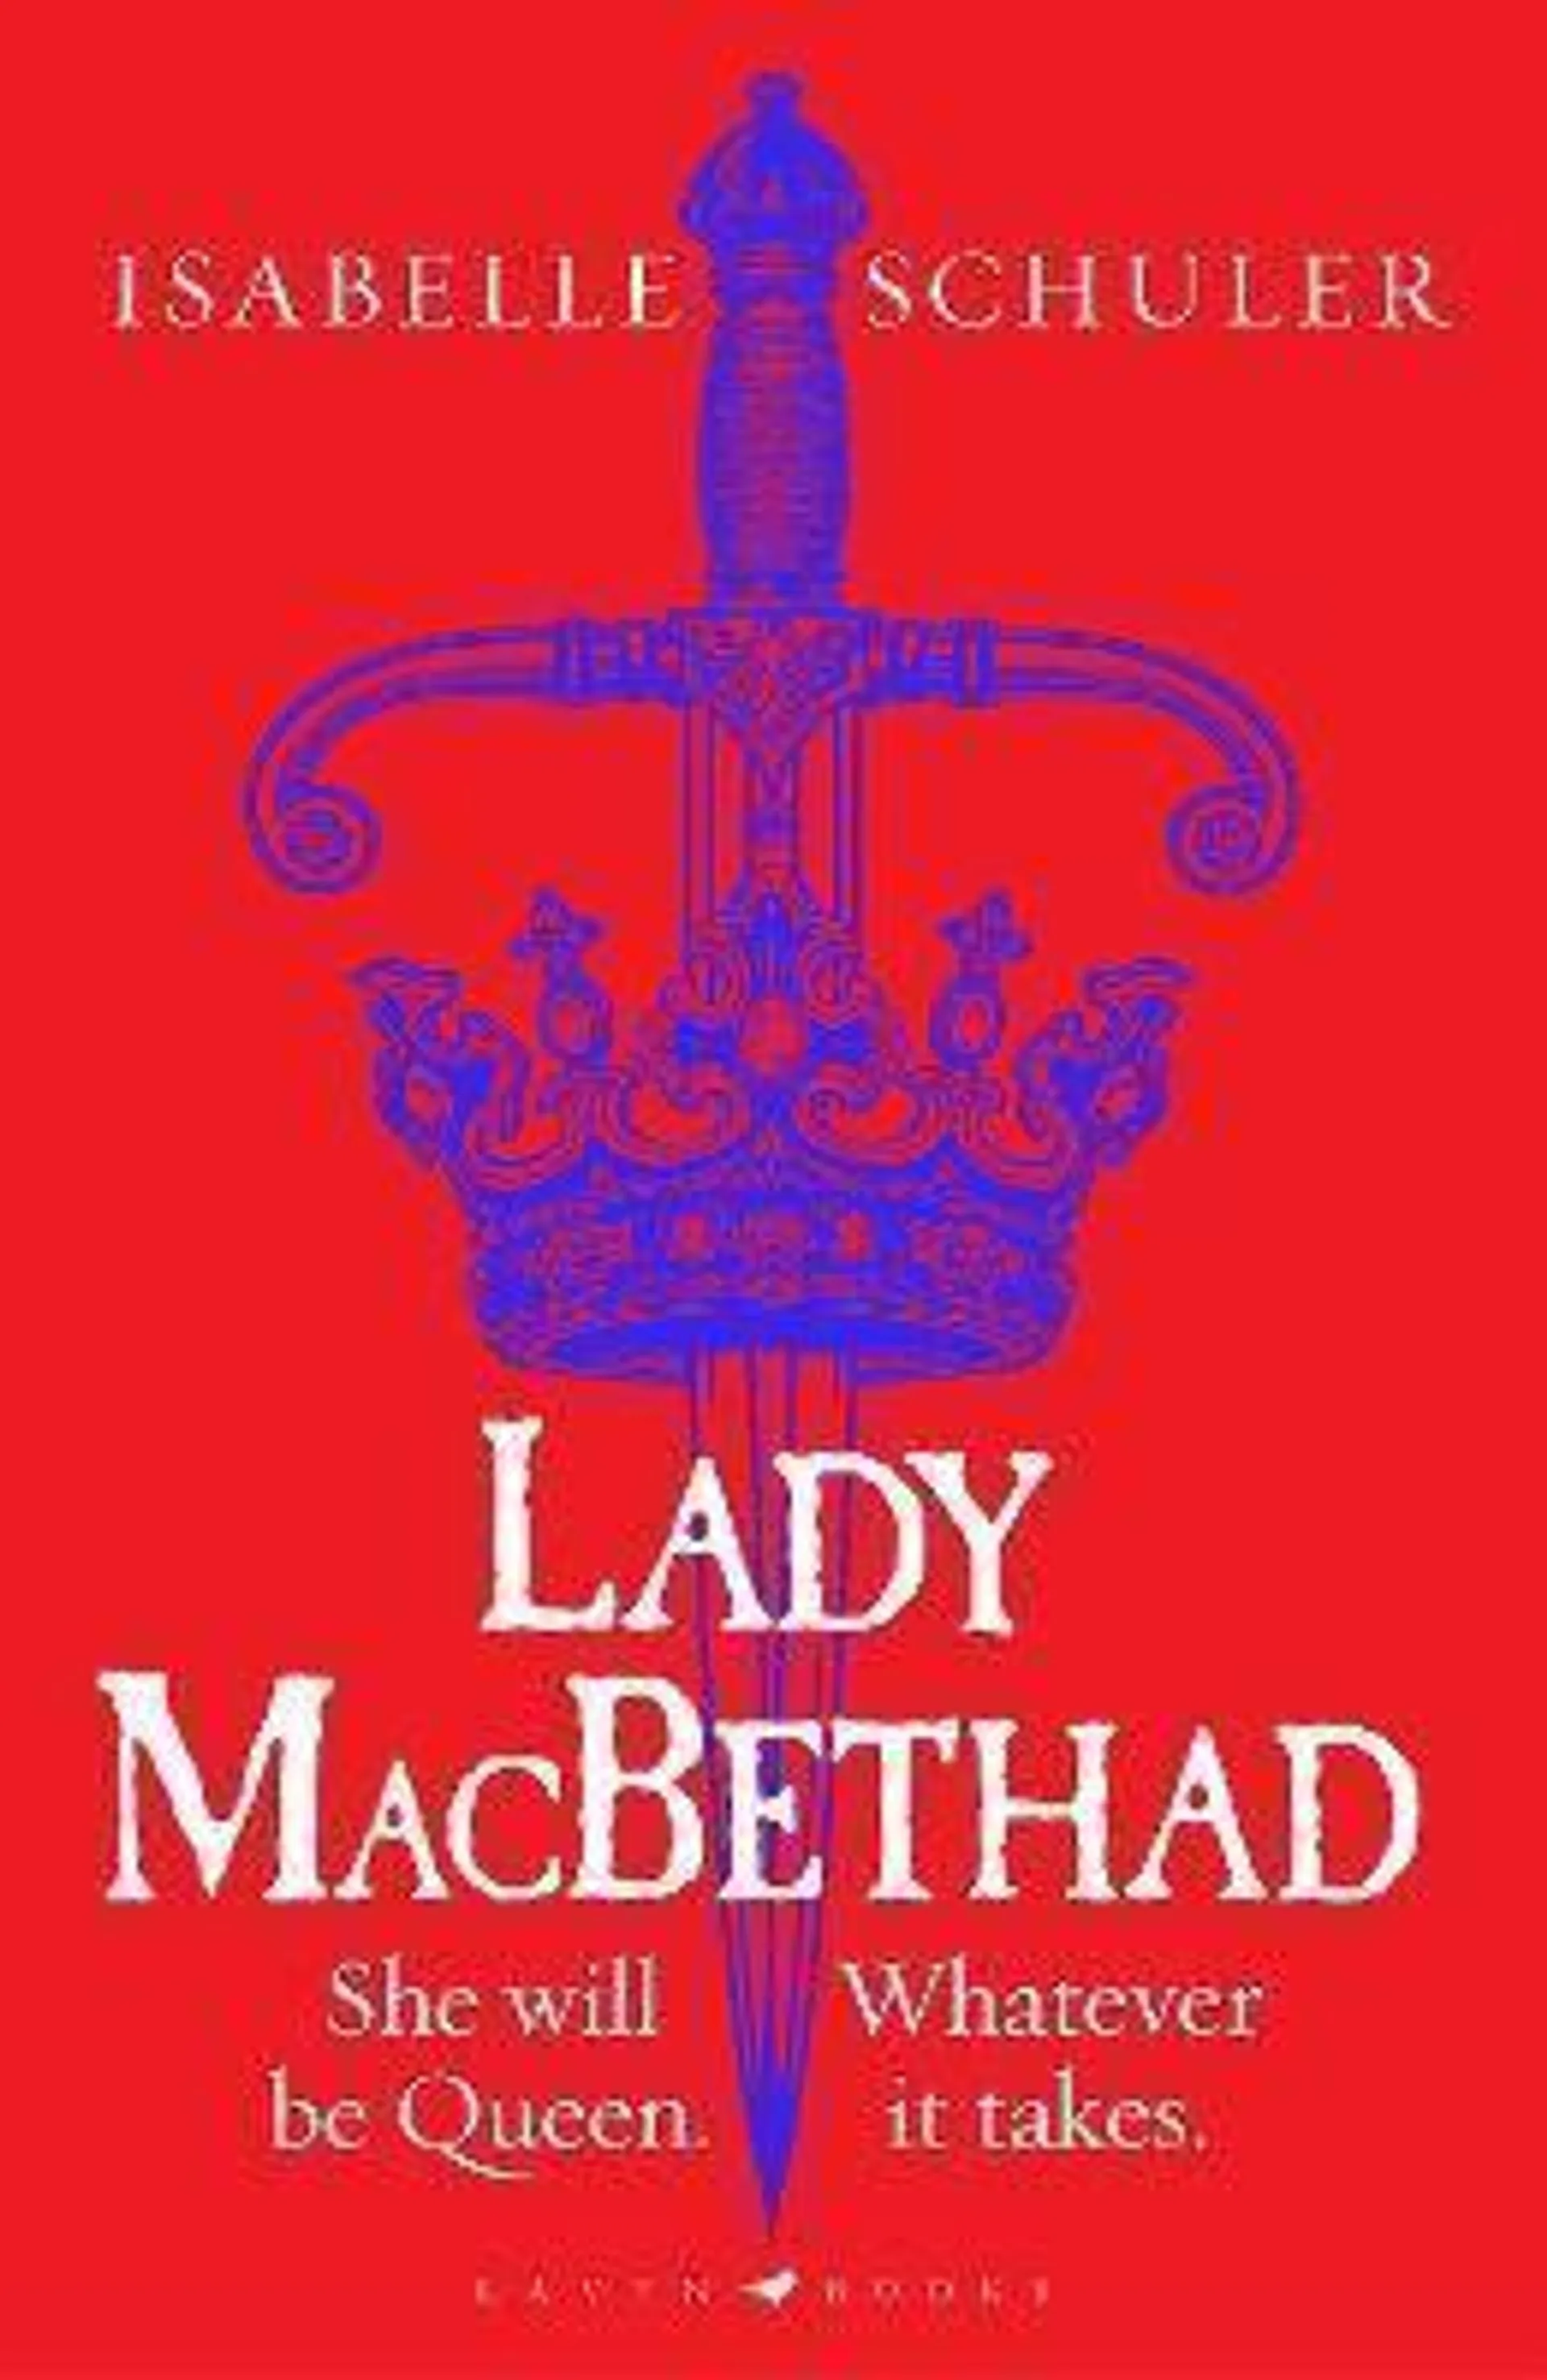 : The electrifying story of love, ambition, revenge and murder behind a real life Scottish queen